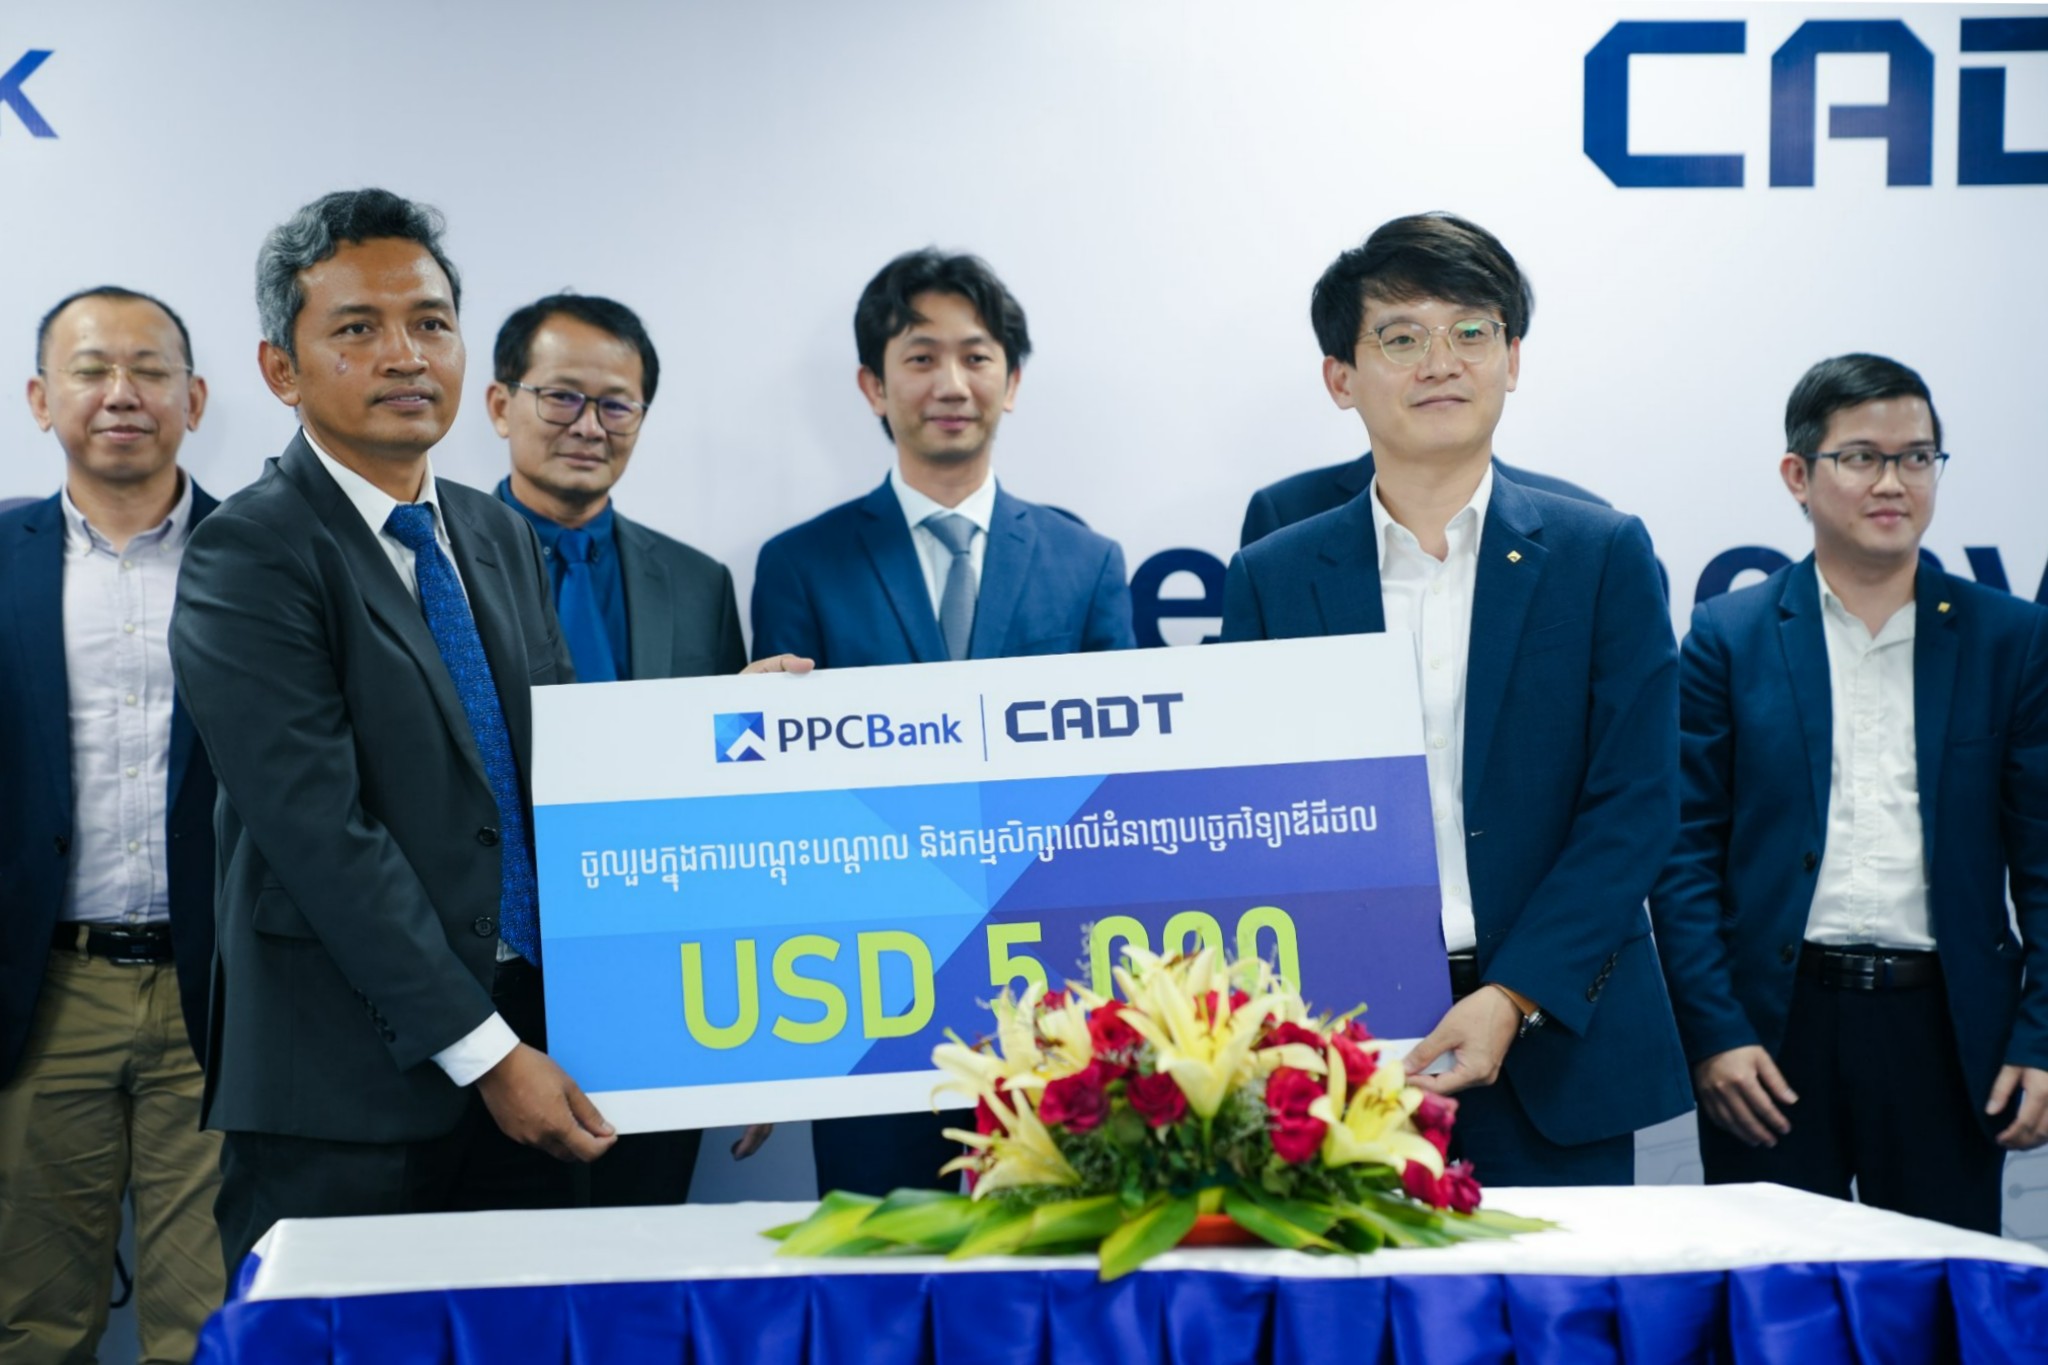 CADT AND PPCBank TO SIGNED A CORPORATION ON DIGITAL EDUCATION AND INTERNSHIP PROGRAM